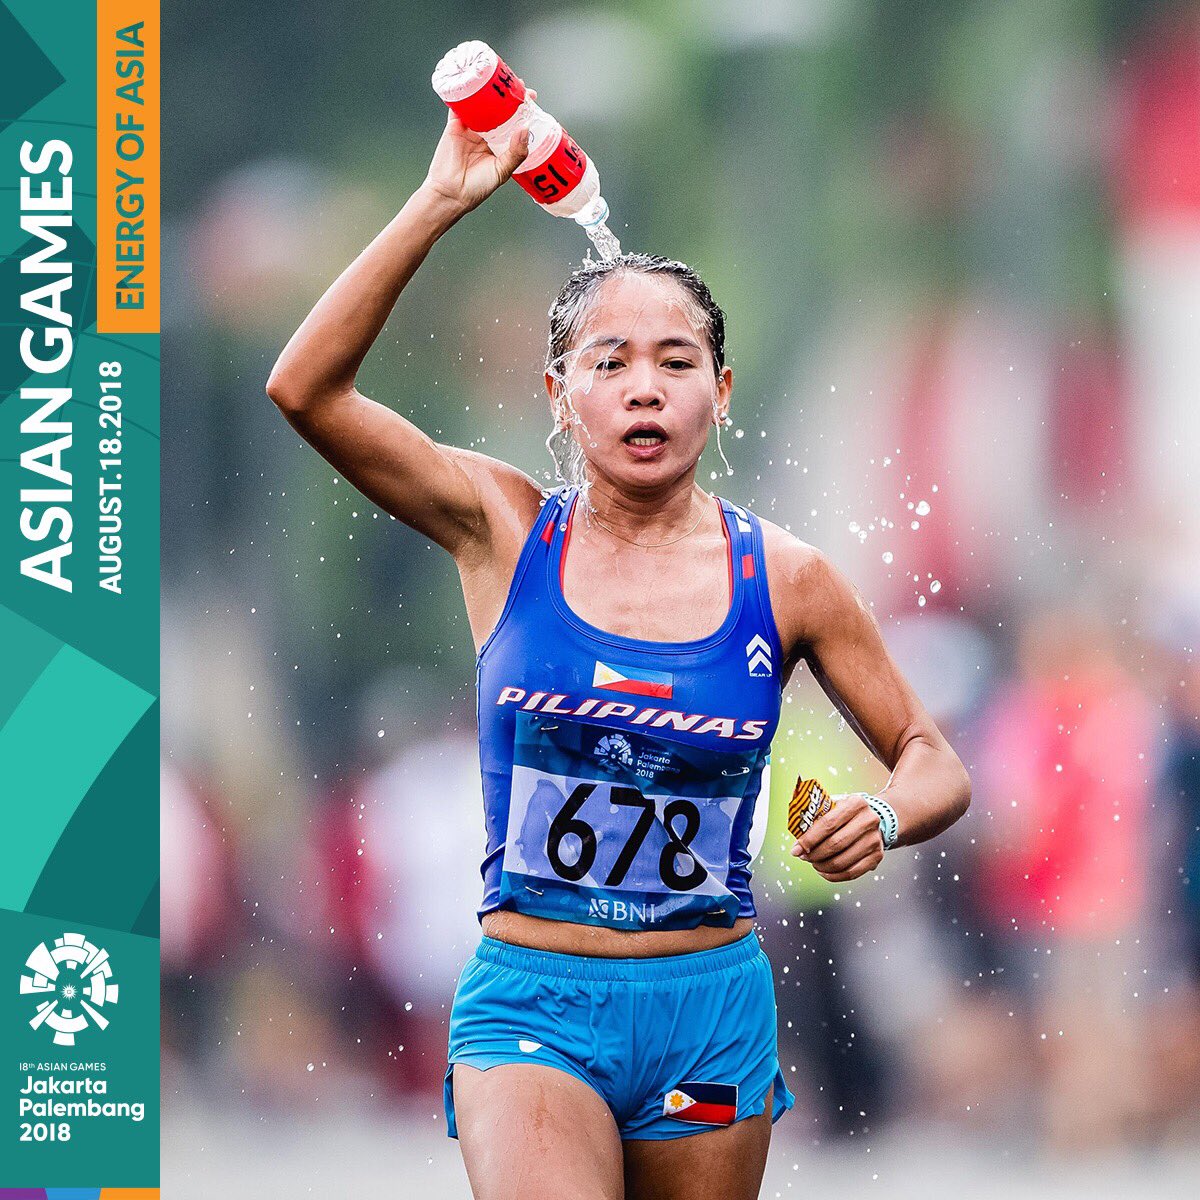 Asian Games 2018 on Twitter: "Sunday is definitely not a ...